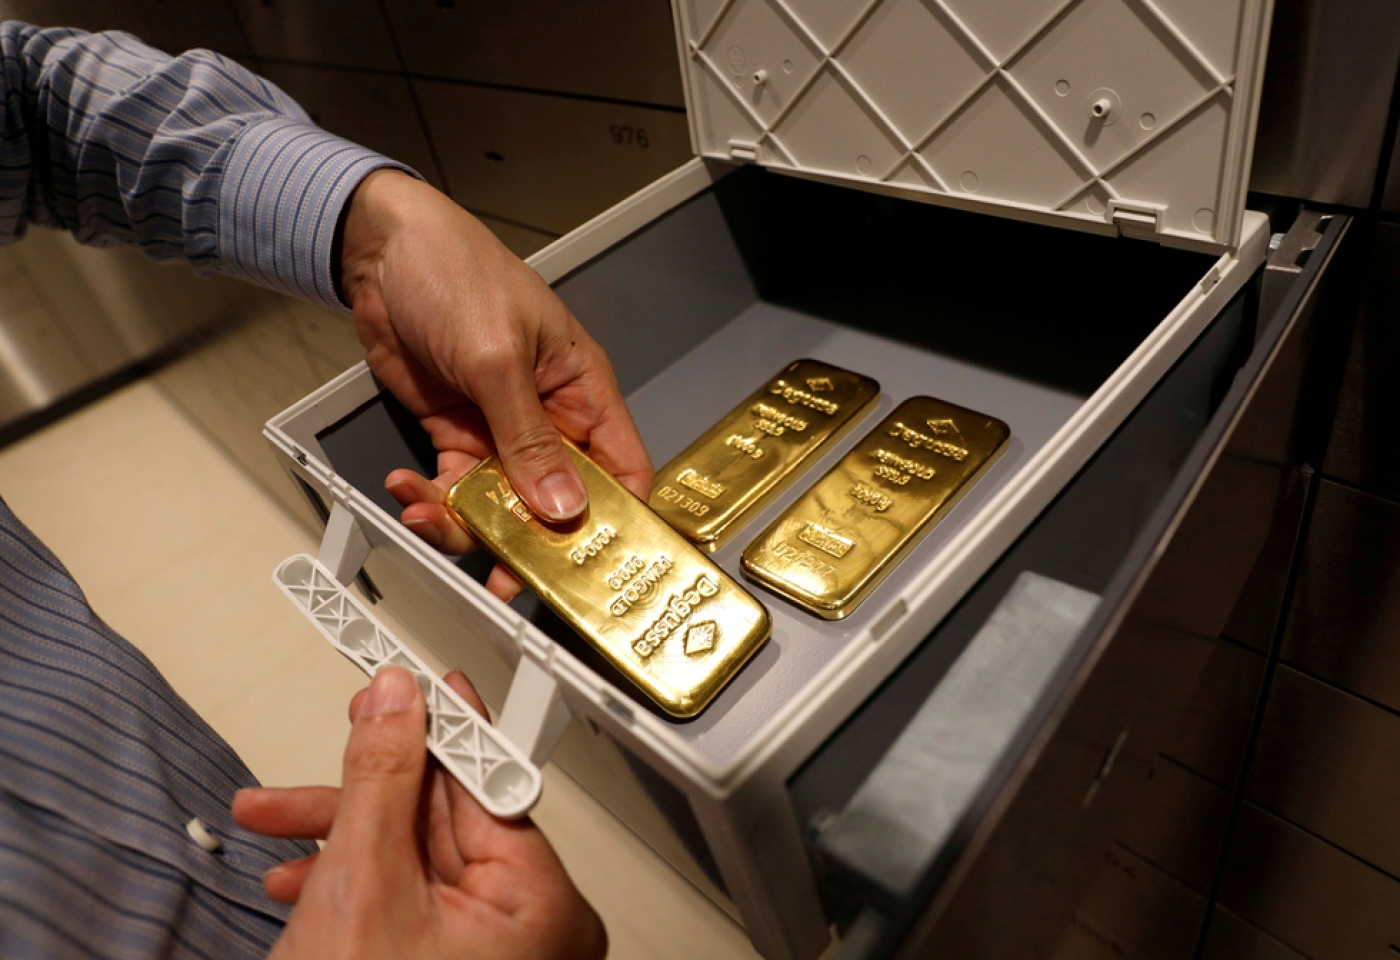 UAE consulate in India faces scrutiny over $2m gold smuggled in diplomatic bags